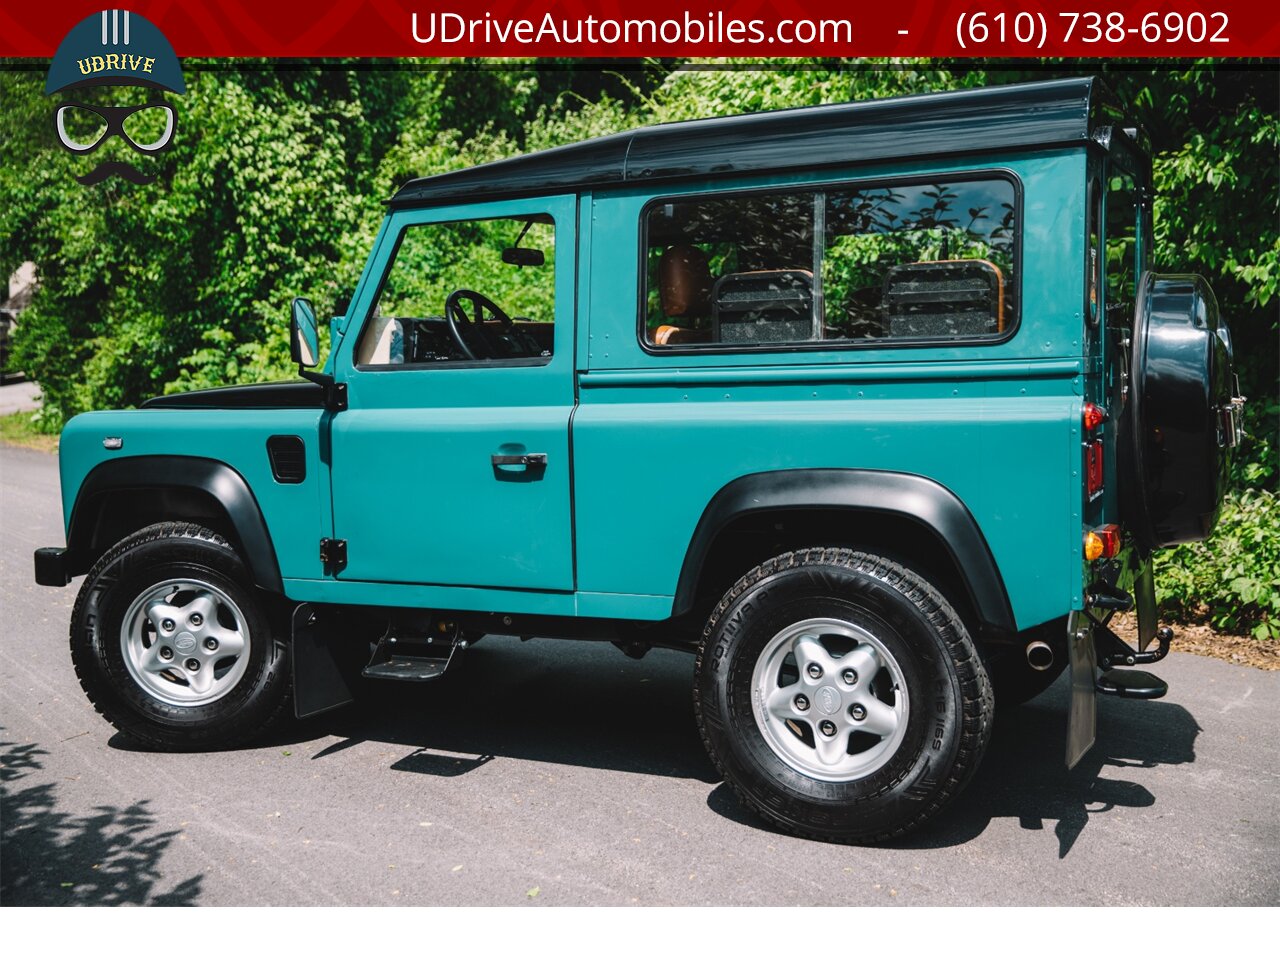 1986 Land Rover Defender 90 D90 4.0L V8 5 Speed Manual New Interior  $25k Recent Engine Build - Photo 4 - West Chester, PA 19382